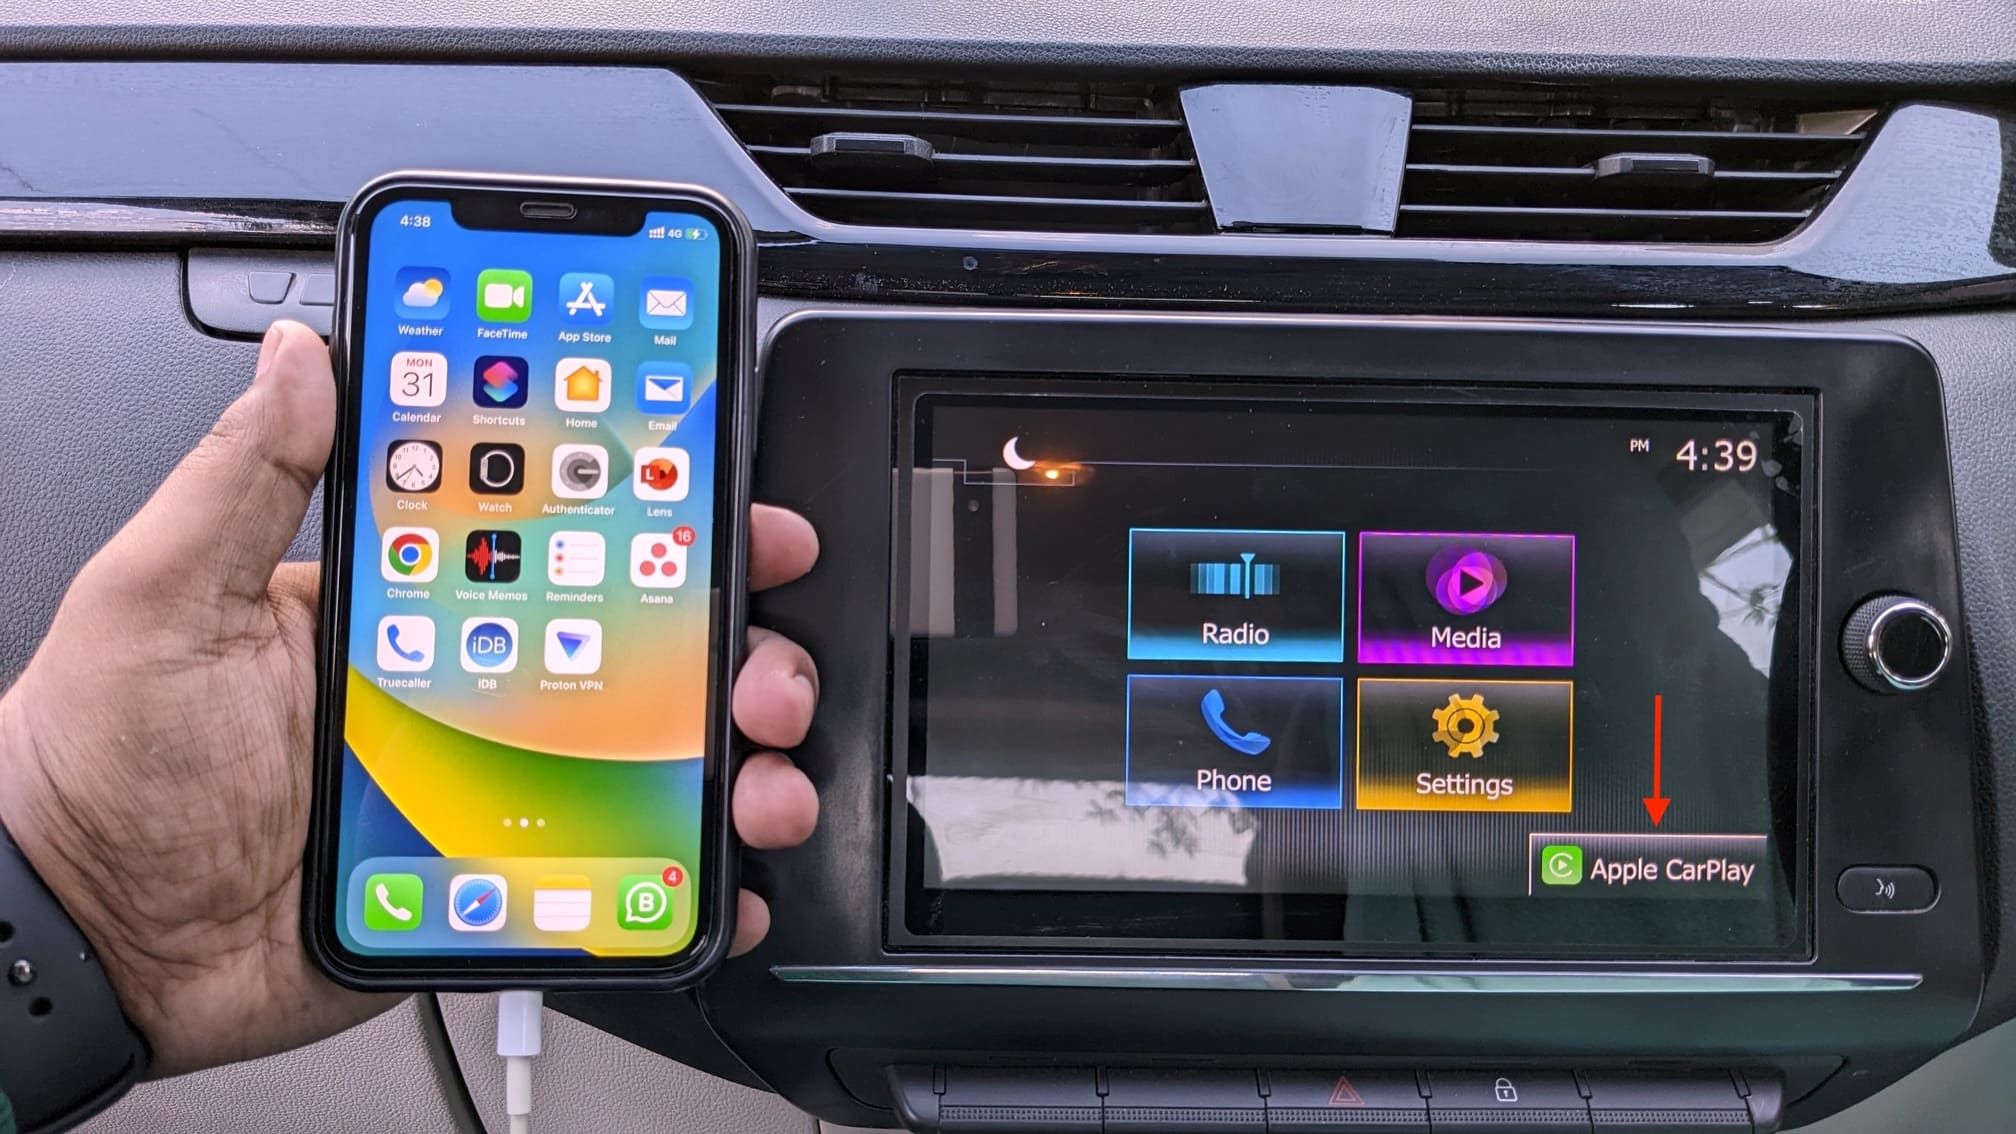 Apple CarPlay on car dashboard with connected iPhone in hand